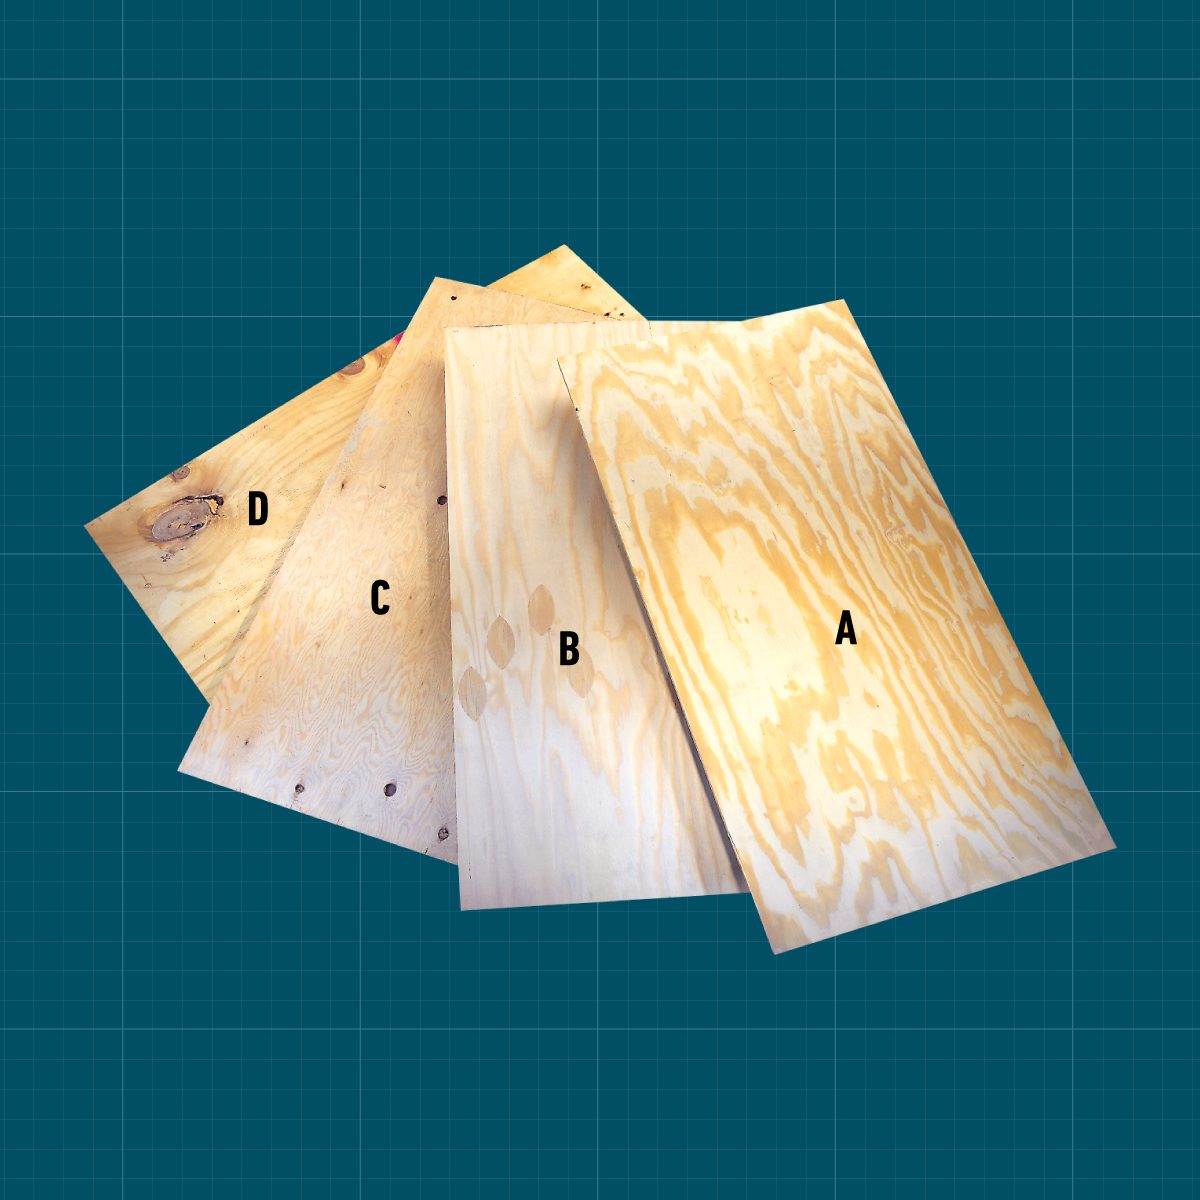 The Different Types Of Plywood Grades on grid background.